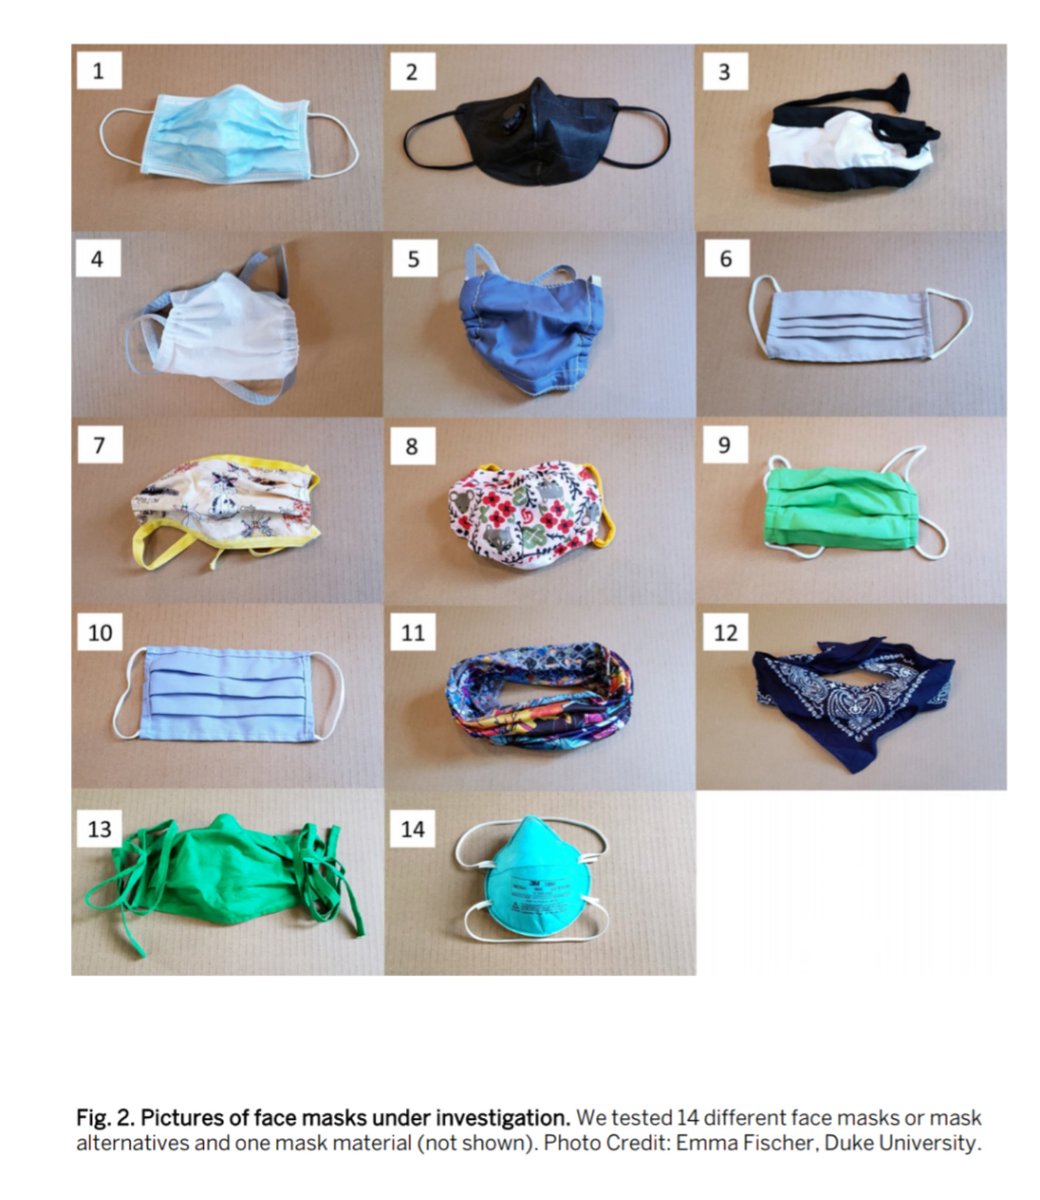 1/ All masks are not the same, and it's hard to tell which ones work better, but this article provides some insights. First, "paper" surgical masks are really very very good.  https://advances.sciencemag.org/content/early/2020/08/07/sciadv.abd3083/tab-pdf